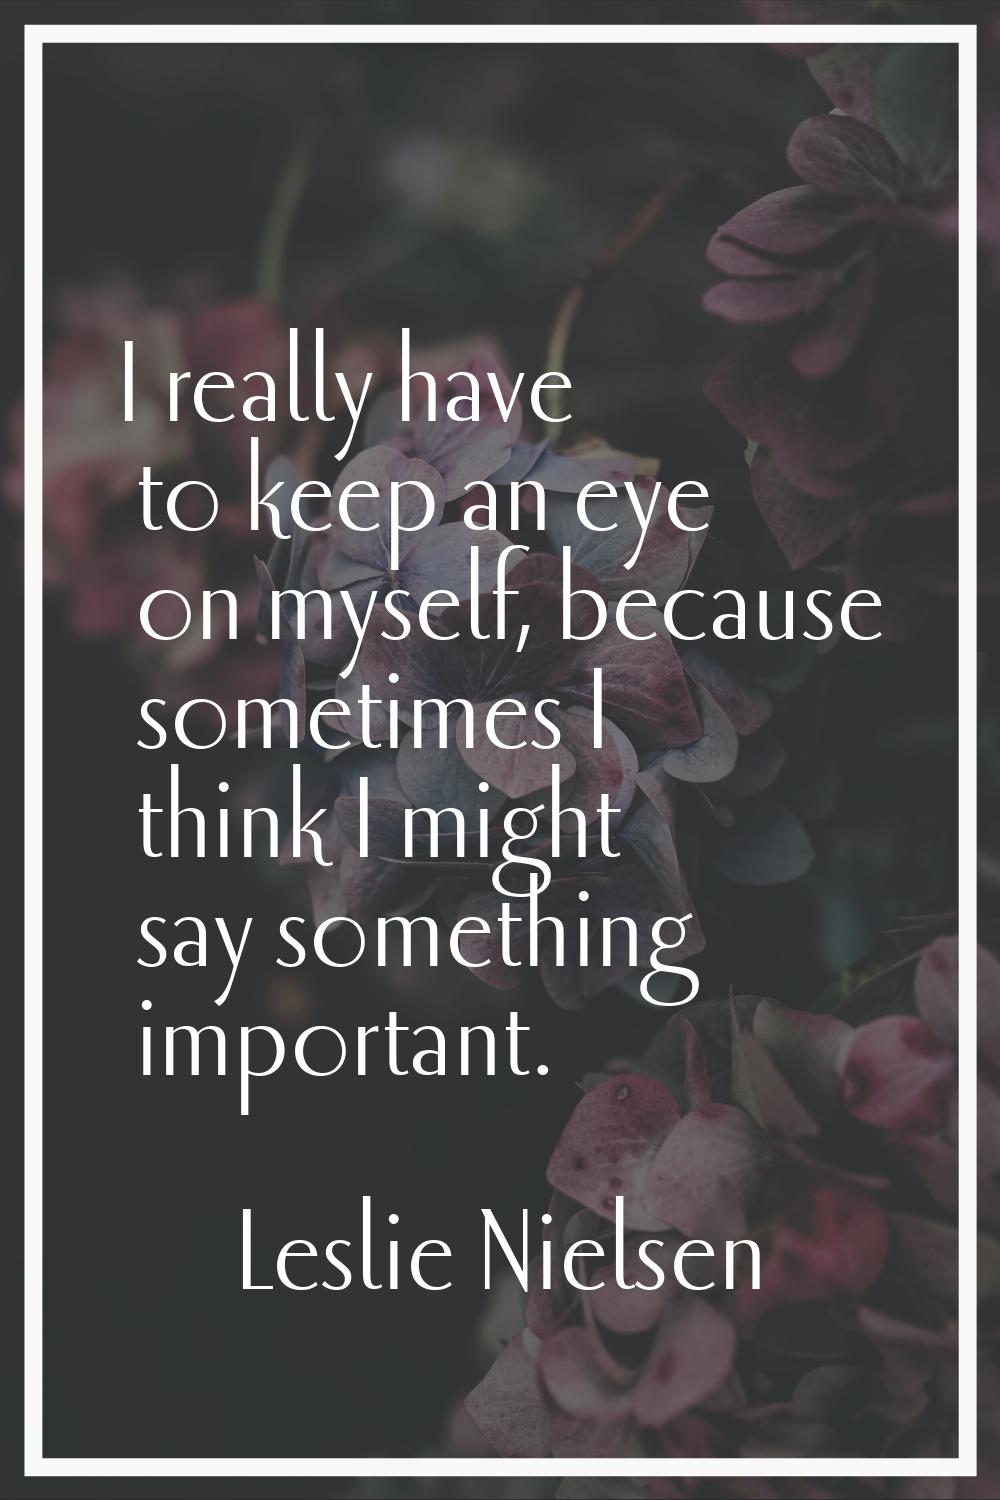 I really have to keep an eye on myself, because sometimes I think I might say something important.